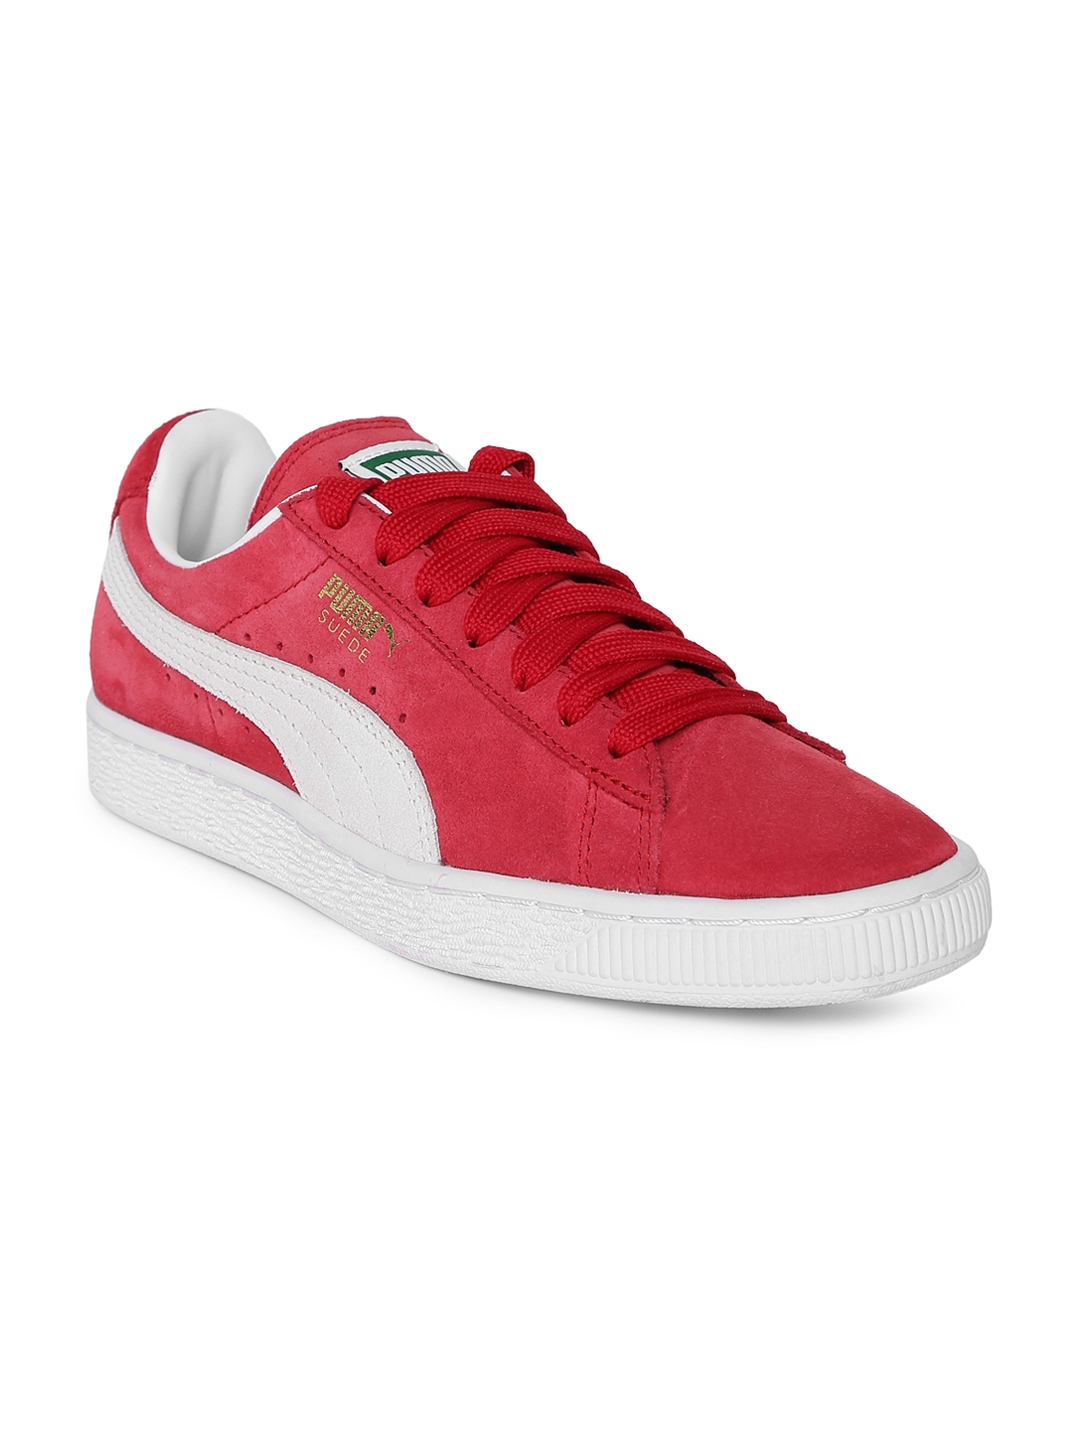 Buy Puma Unisex Red Suede Sneakers - Casual Shoes for Unisex 7634200 ...